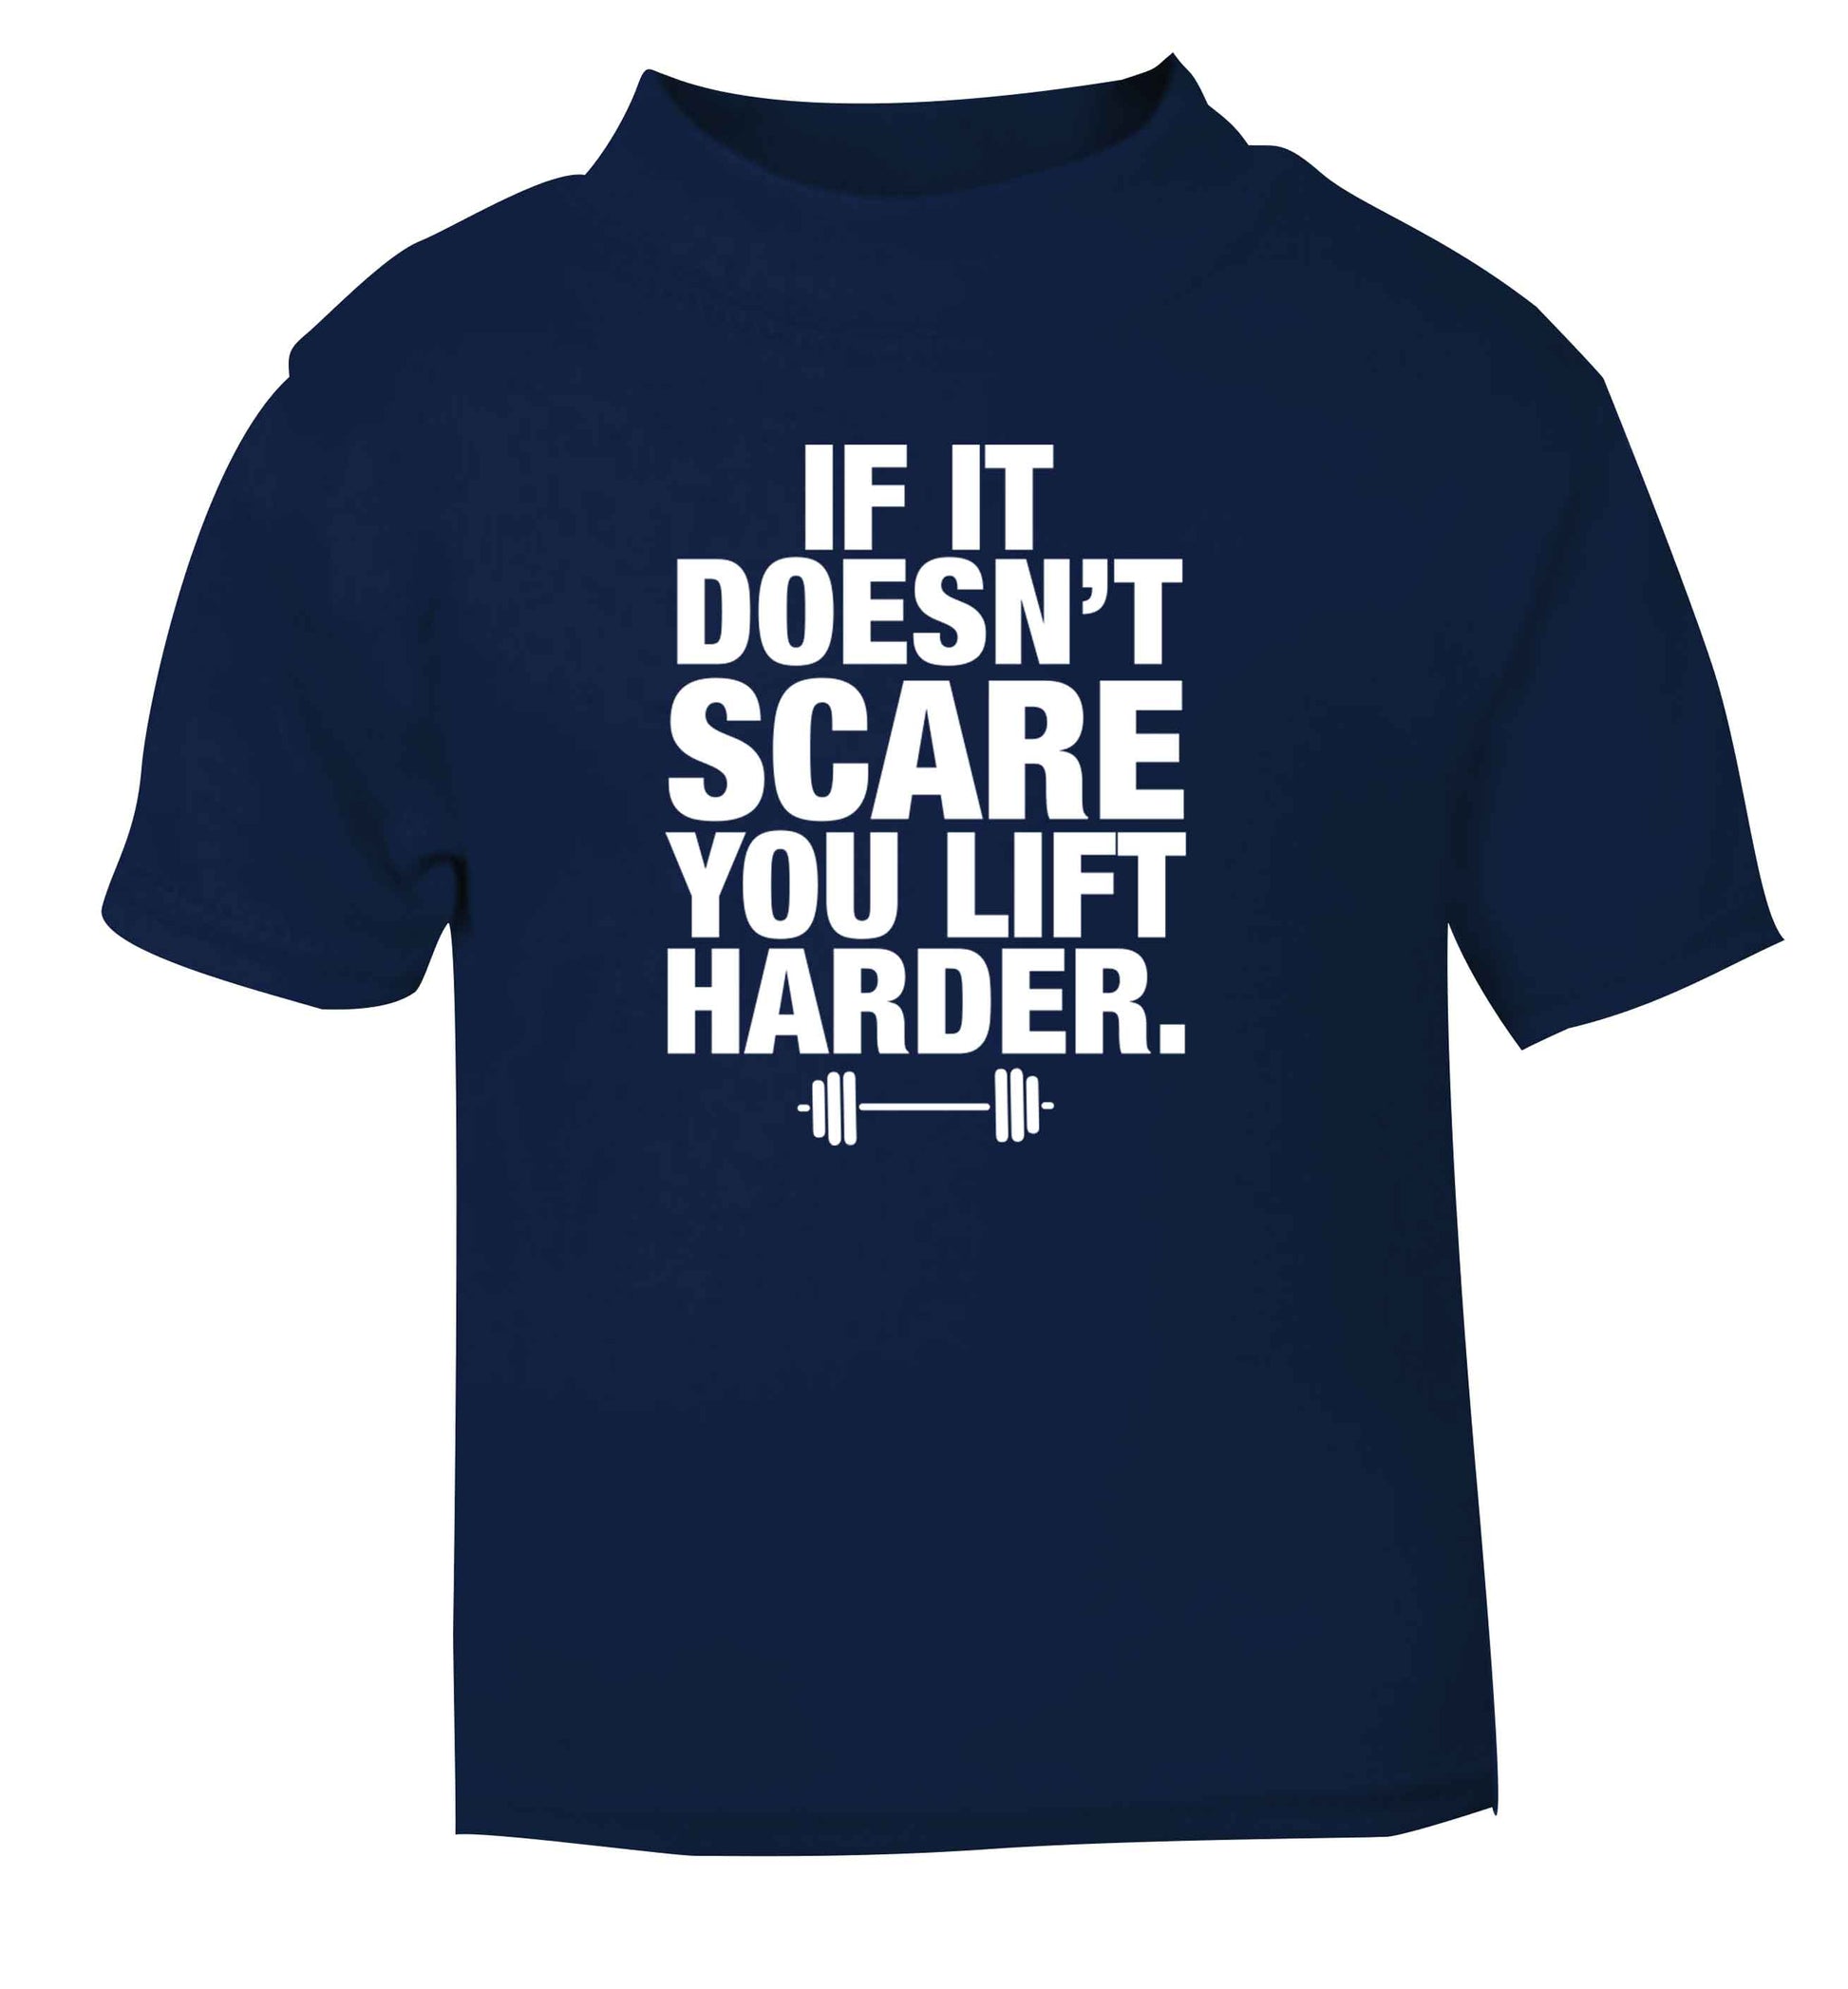 If it doesnt' scare you lift harder navy Baby Toddler Tshirt 2 Years